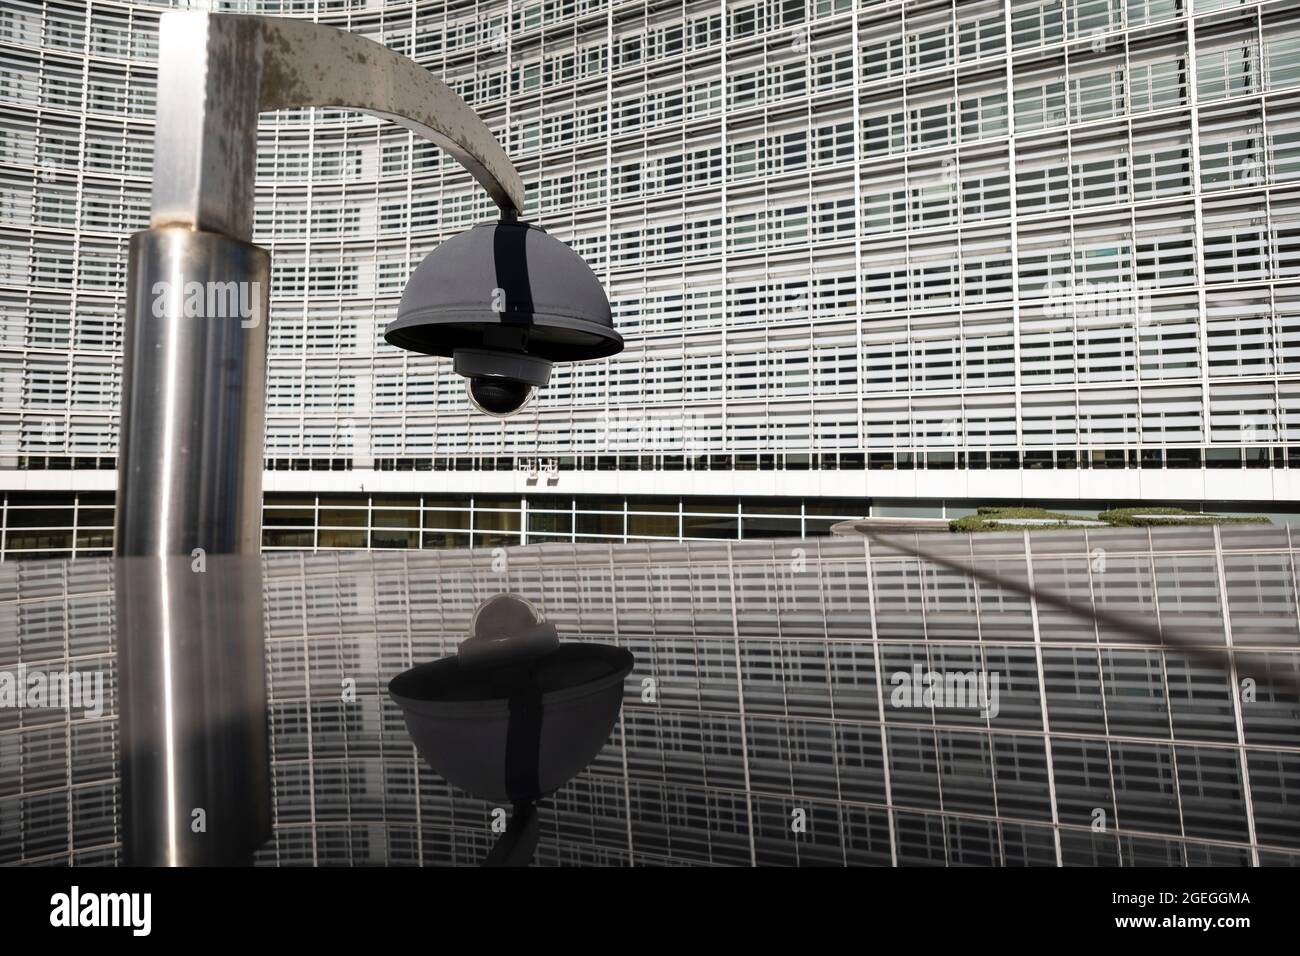 Belgium, Brussels: CCTV security camera in front of the Berlaymont building, headquarters of the European Commission Stock Photo